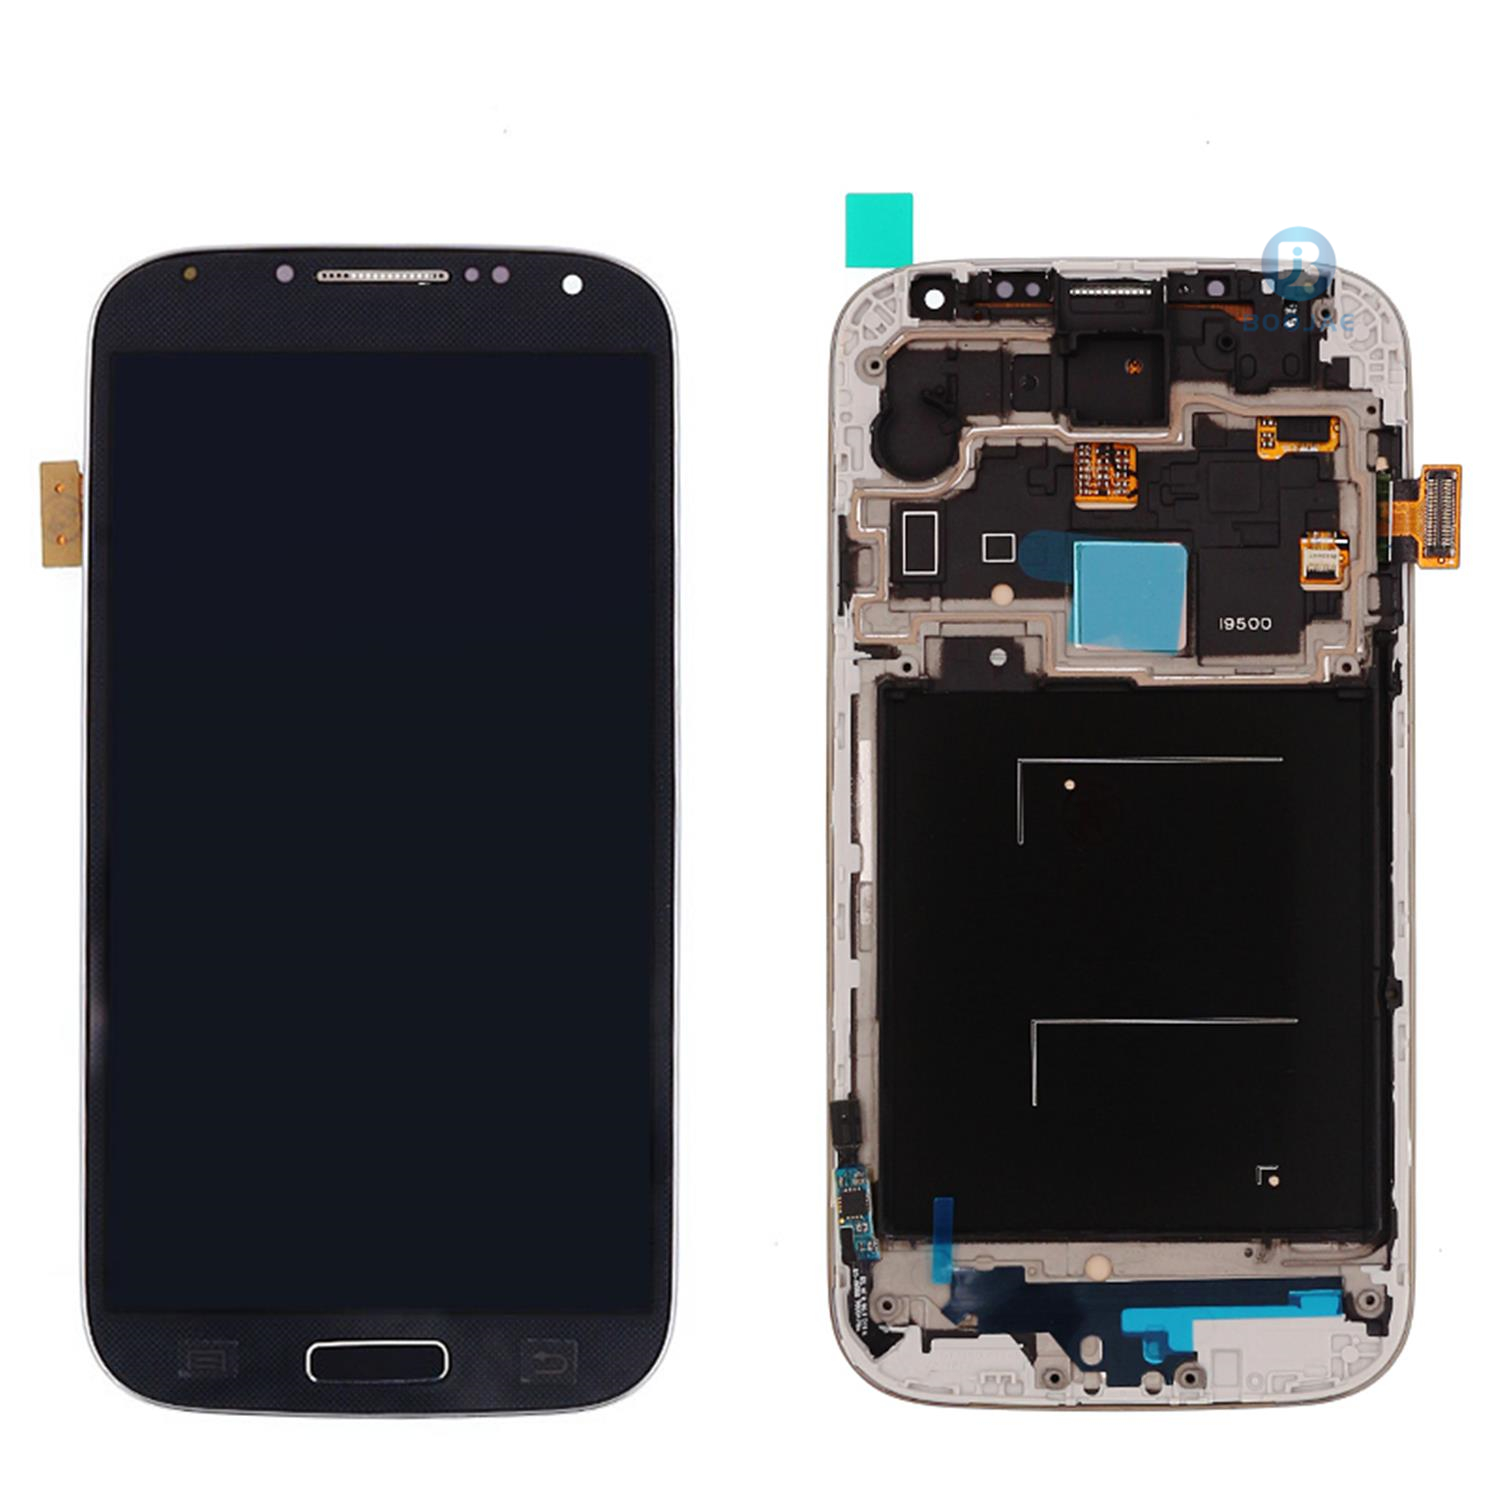 Samsung Galaxy S4 i9505 LCD Screen Display and Touch Panel Digitizer Assembly Replacement